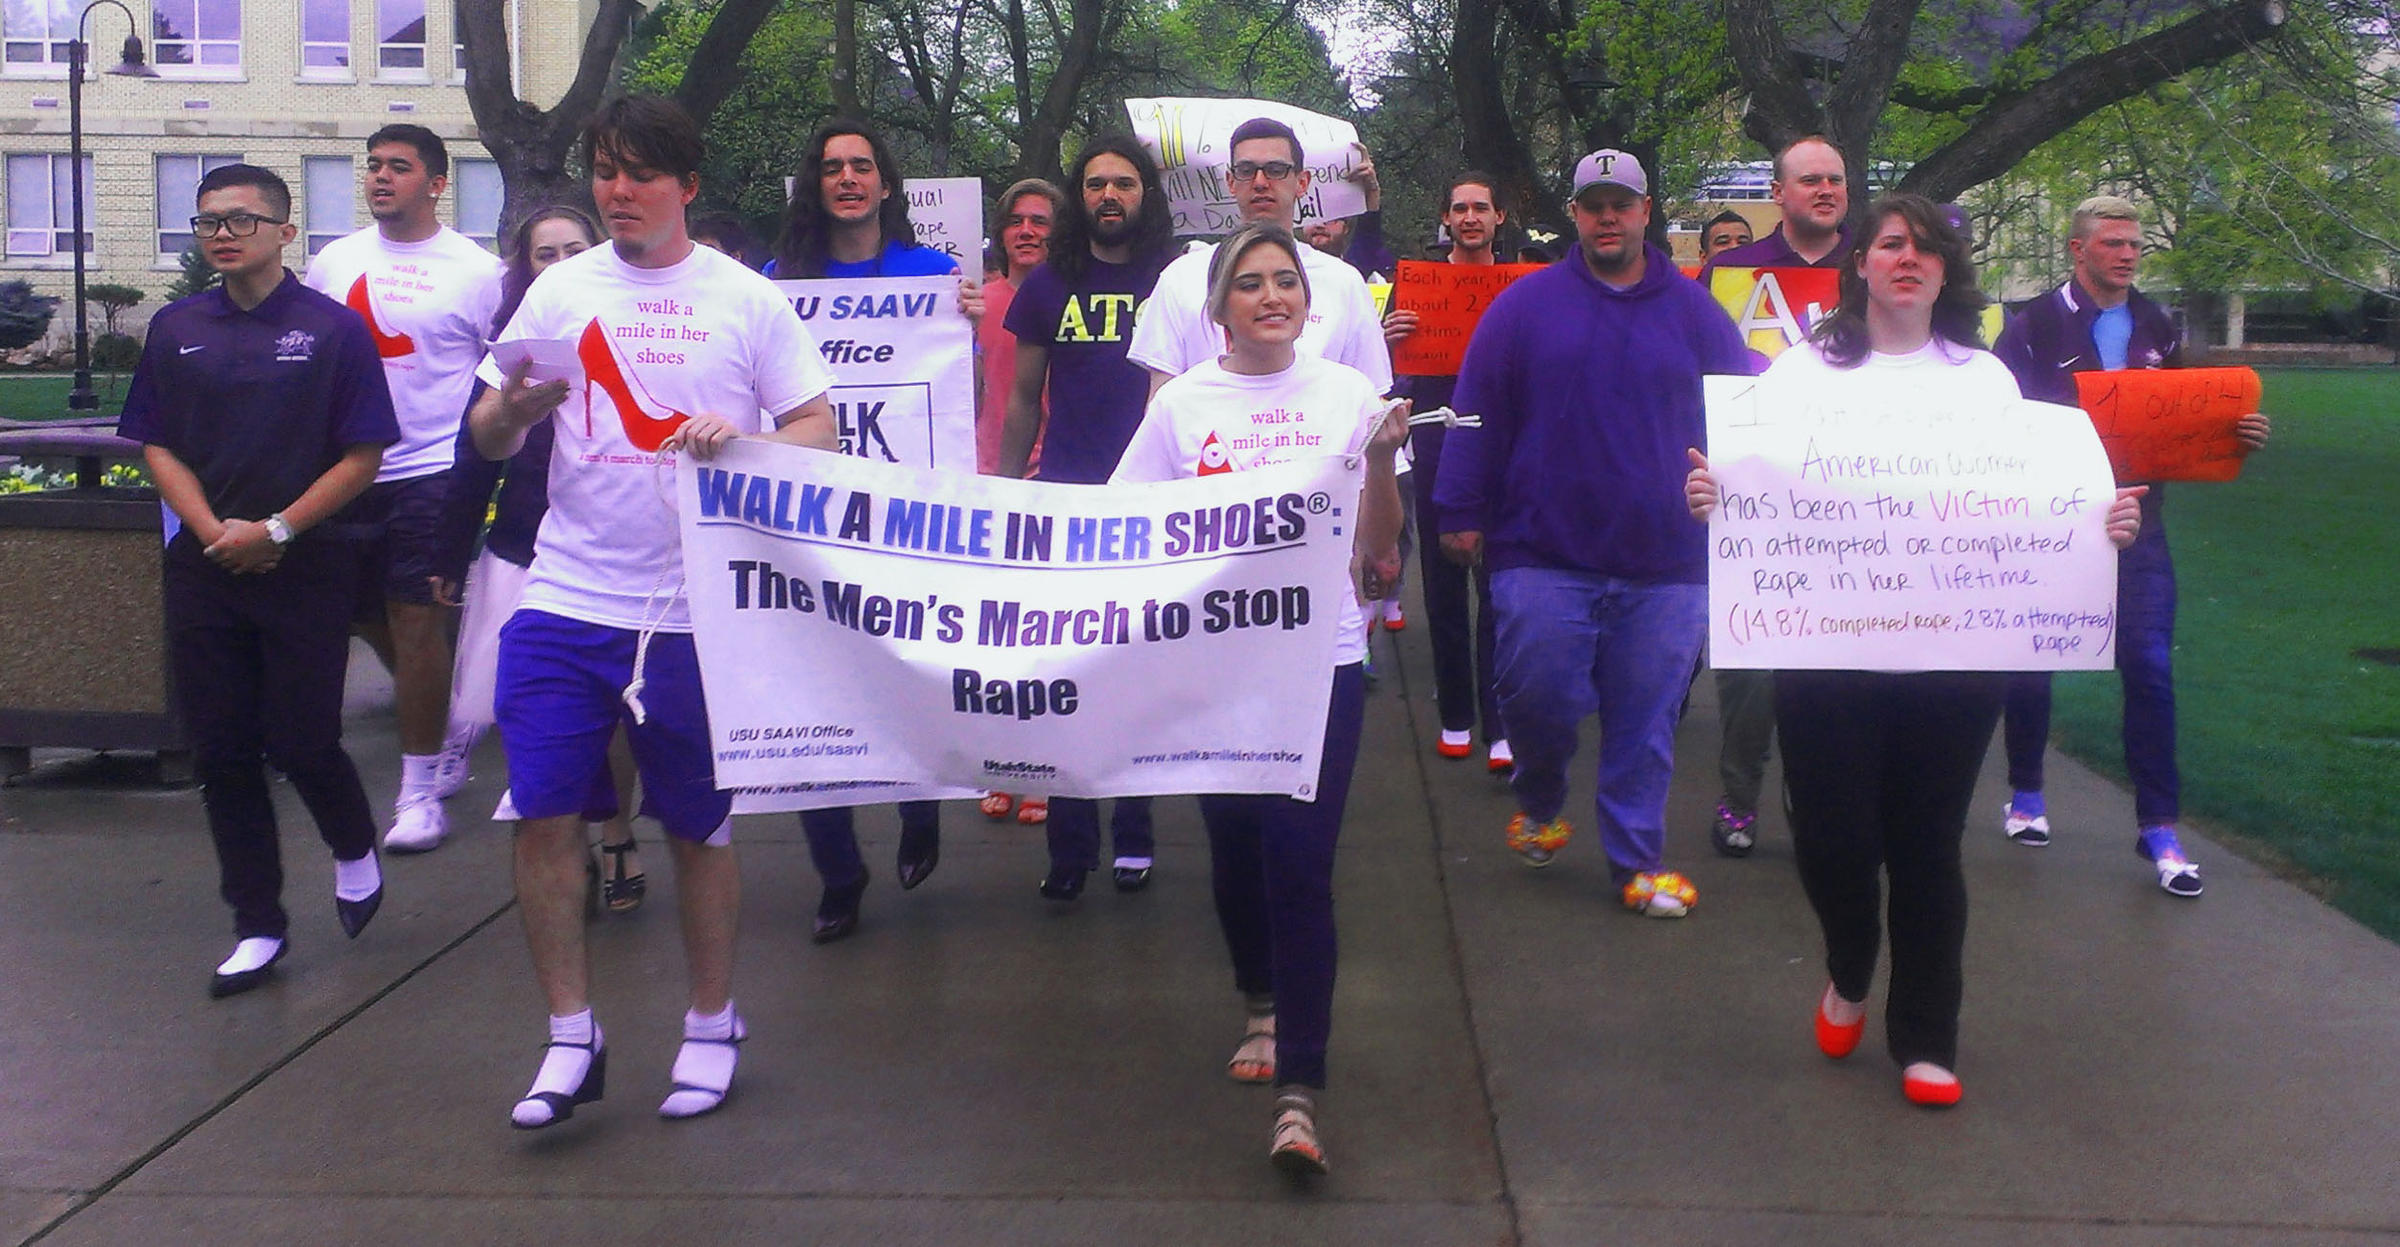 Walk A Mile In Her Shoes 2018